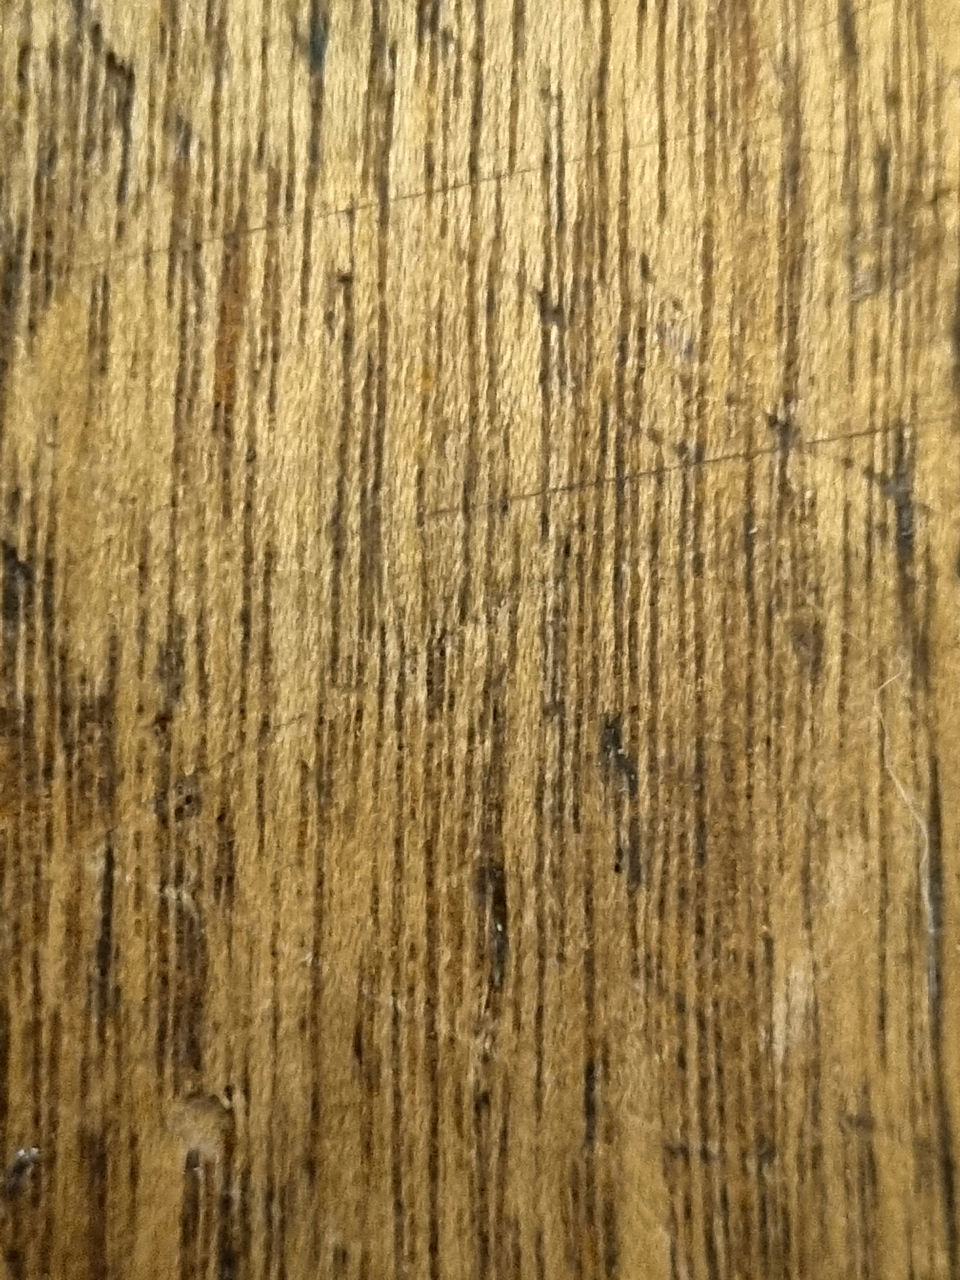 SURFACE LEVEL OF WOODEN FLOOR